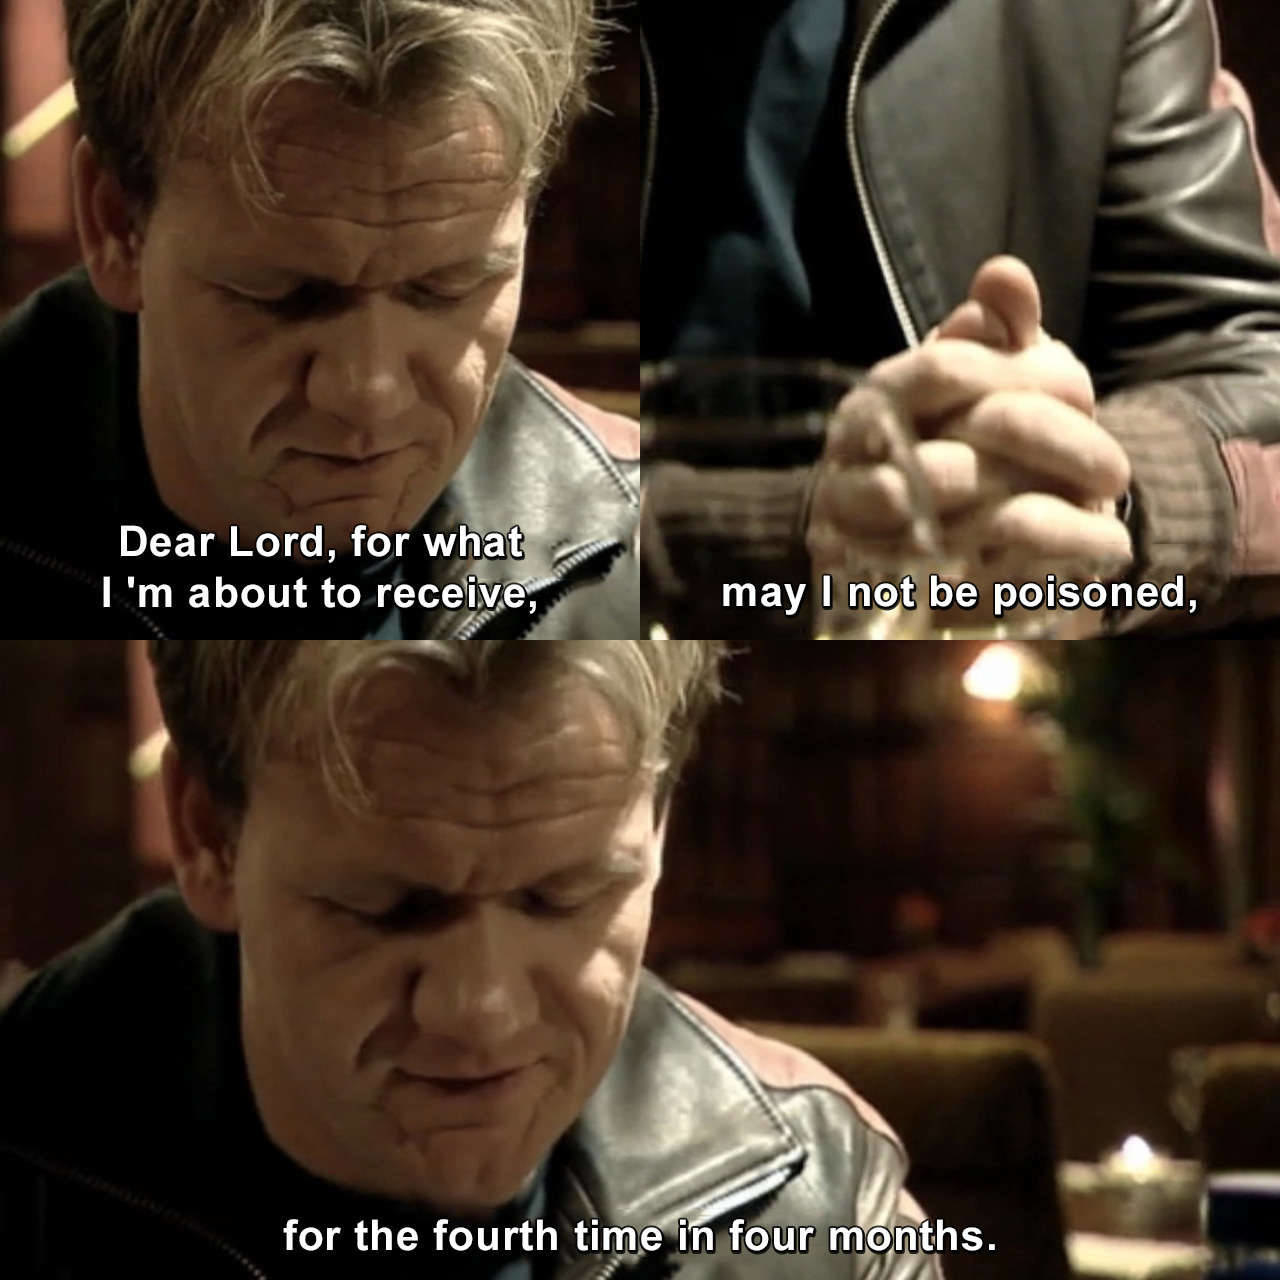 Gordon praying to not get poisoned for the fourth time in four months